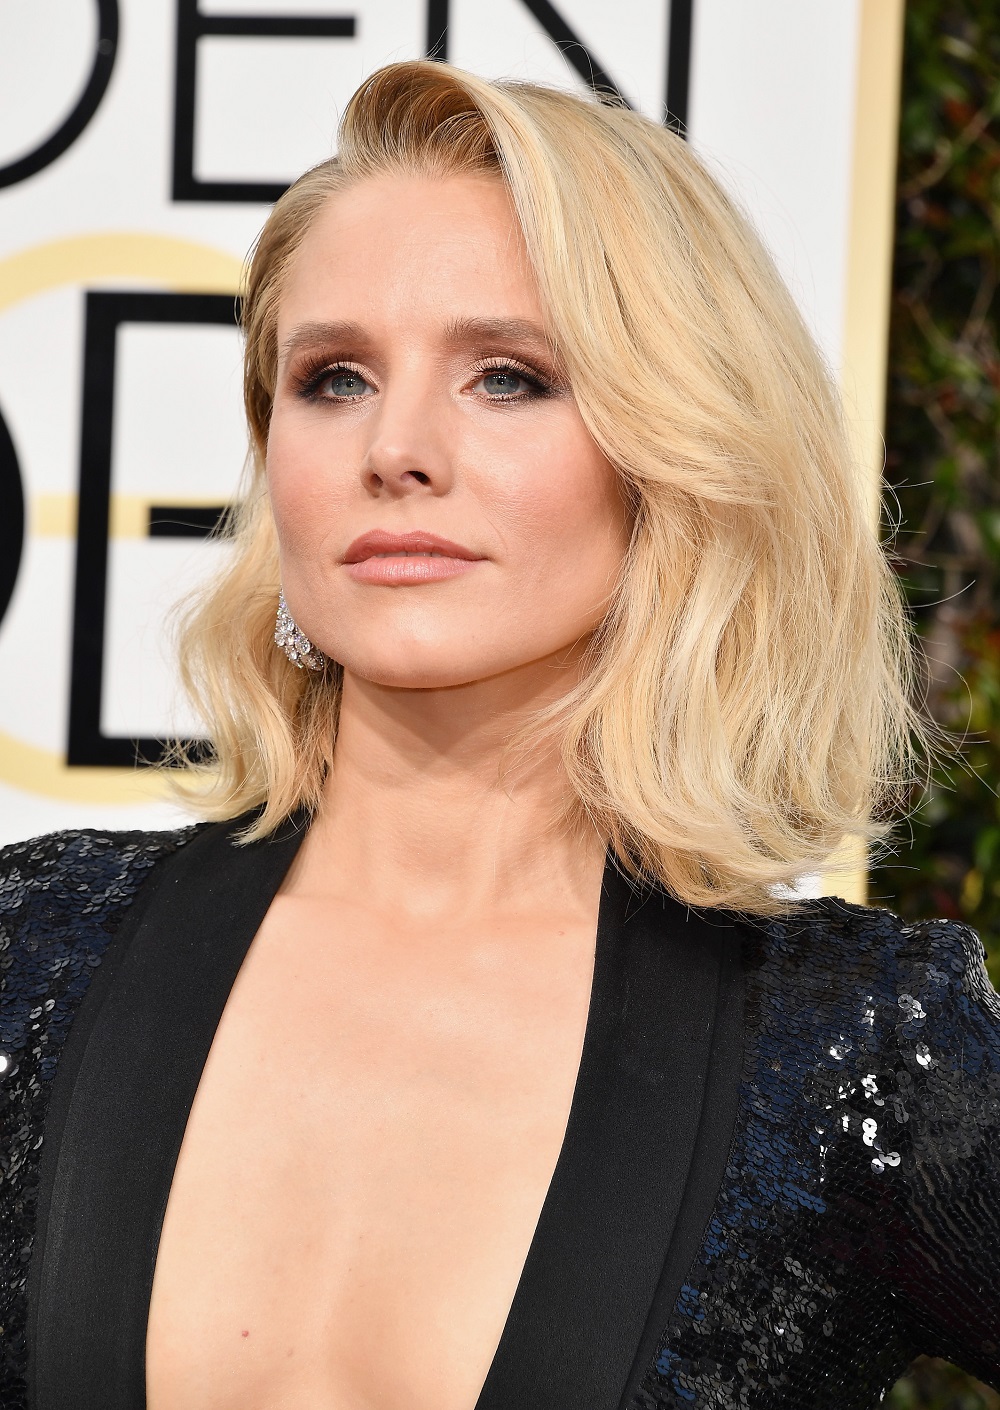 Kristen Bell attends The Weinstein Company and Netflix Golden Globe Party wearing a wavy bob hairstyle.